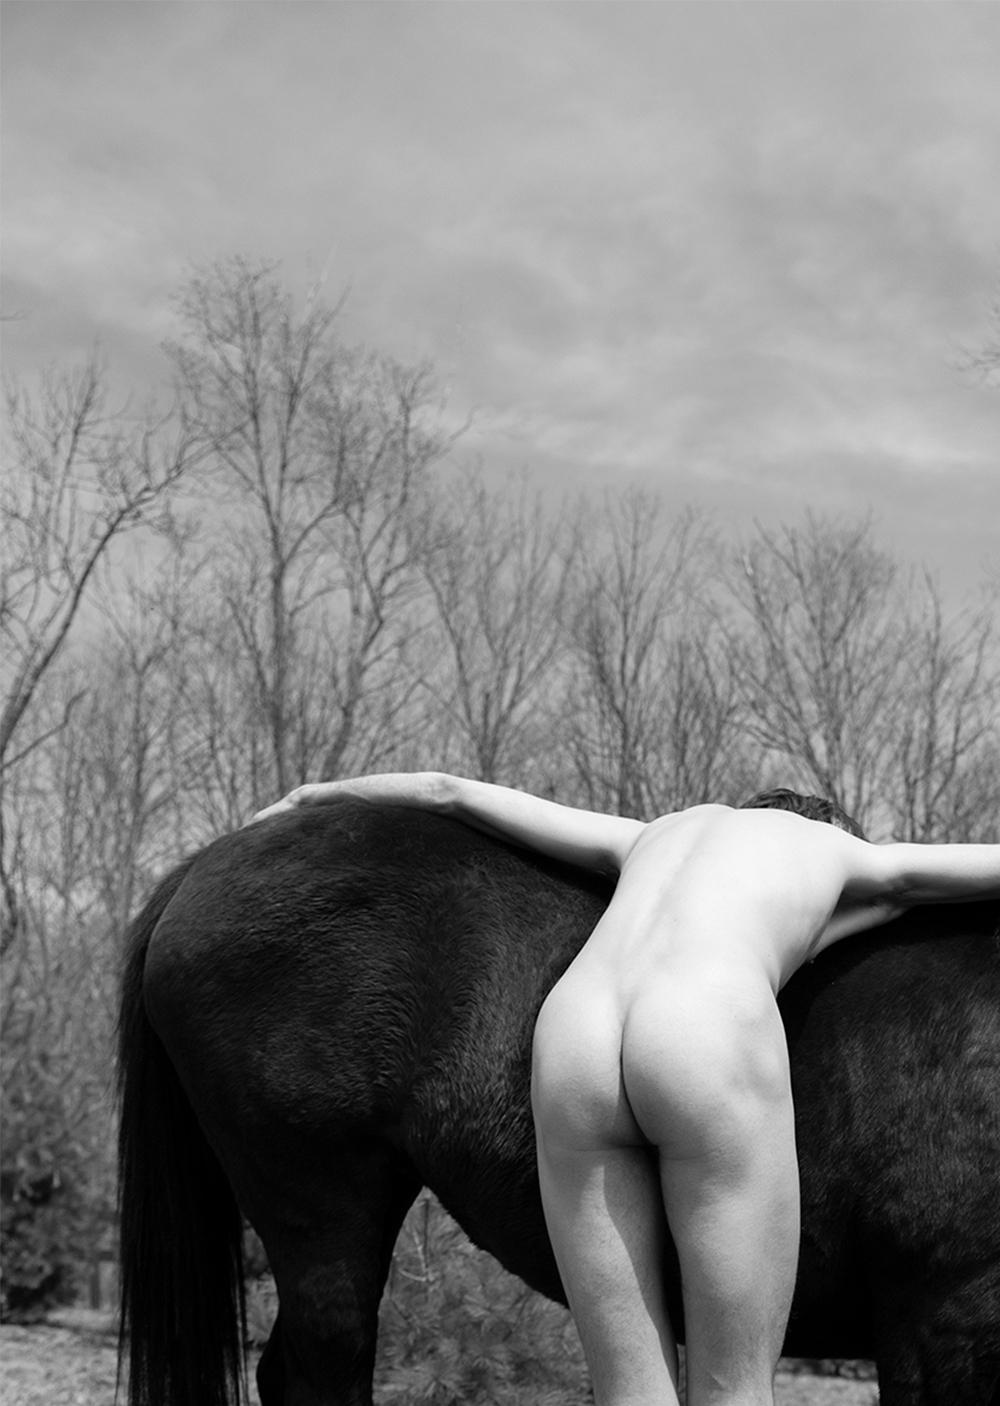 Untitled 2, 2023 by Ricky Cohete
From The series Horse and Dancer
Archival Pigment print
Image size: 36 in. H x 24 in. W
Edition of 10
Unframed

Black and White Photography

_________________________
Ricky Cohete was born in a coastal city in